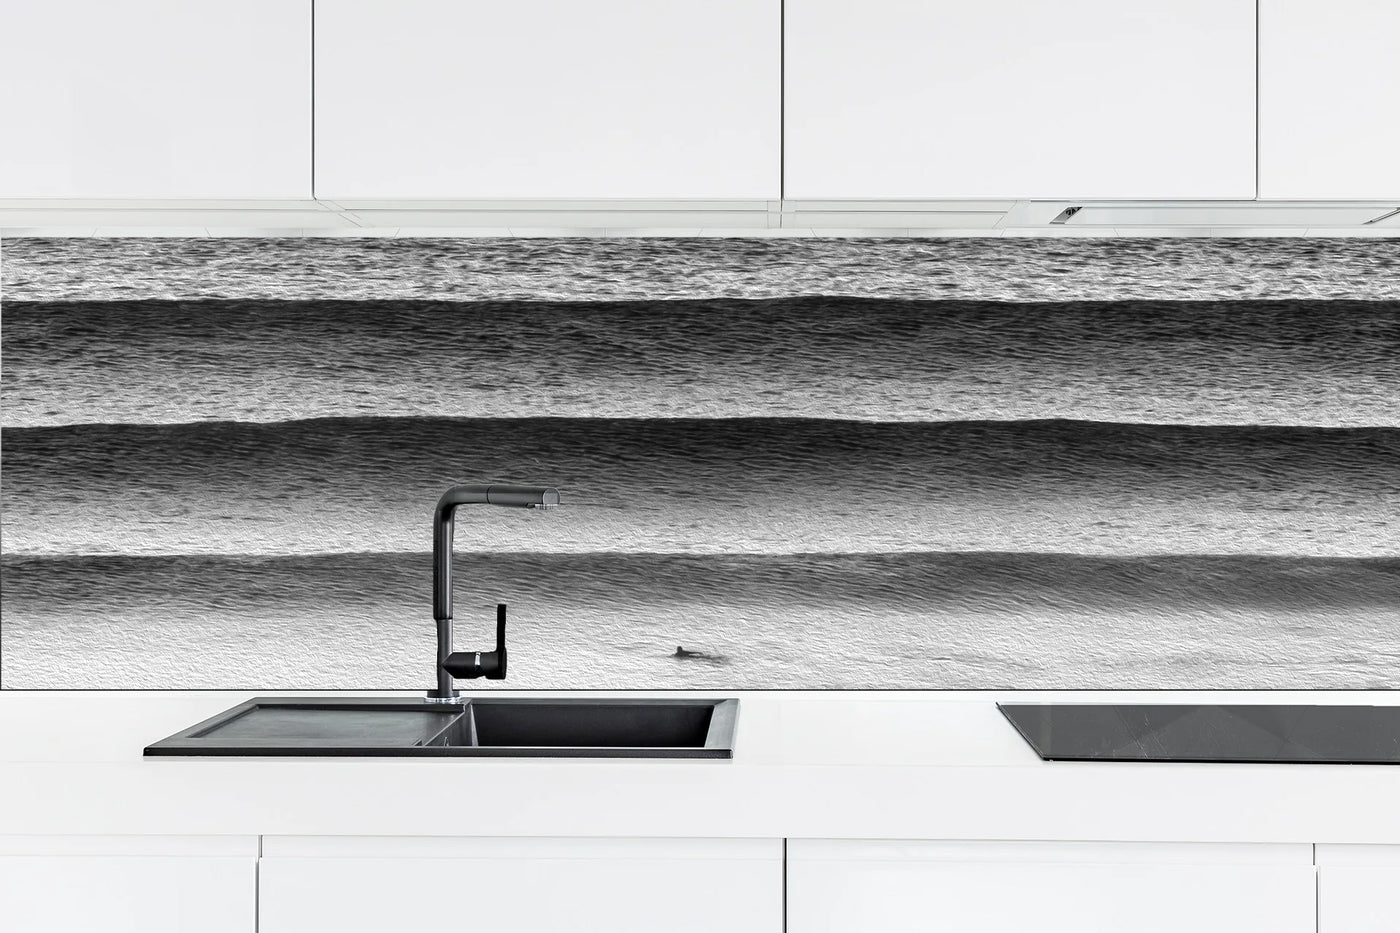 Thinking of an ocean-inspired splashback? Enhance your space with coastal beauty